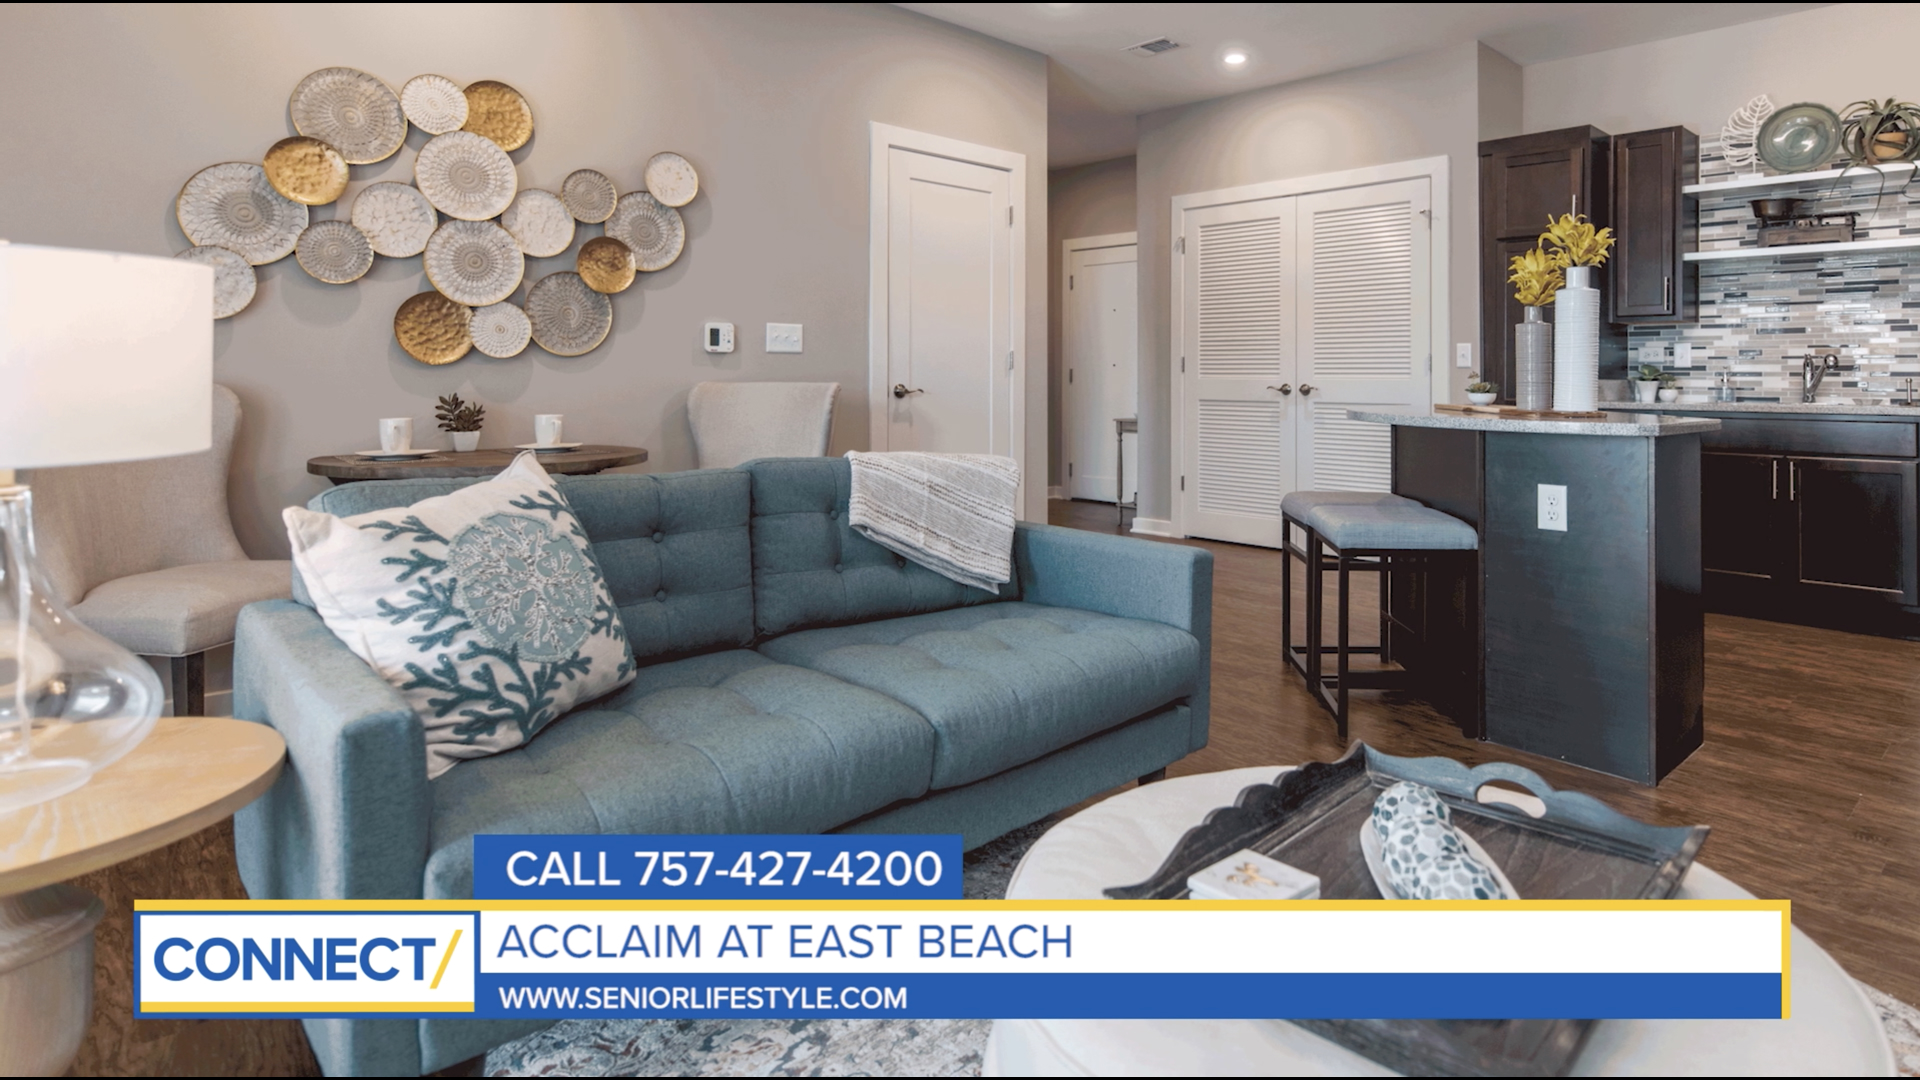 Acclaim at East Beach offers maintenance-free, resort-style living. Call today and set up a tour!